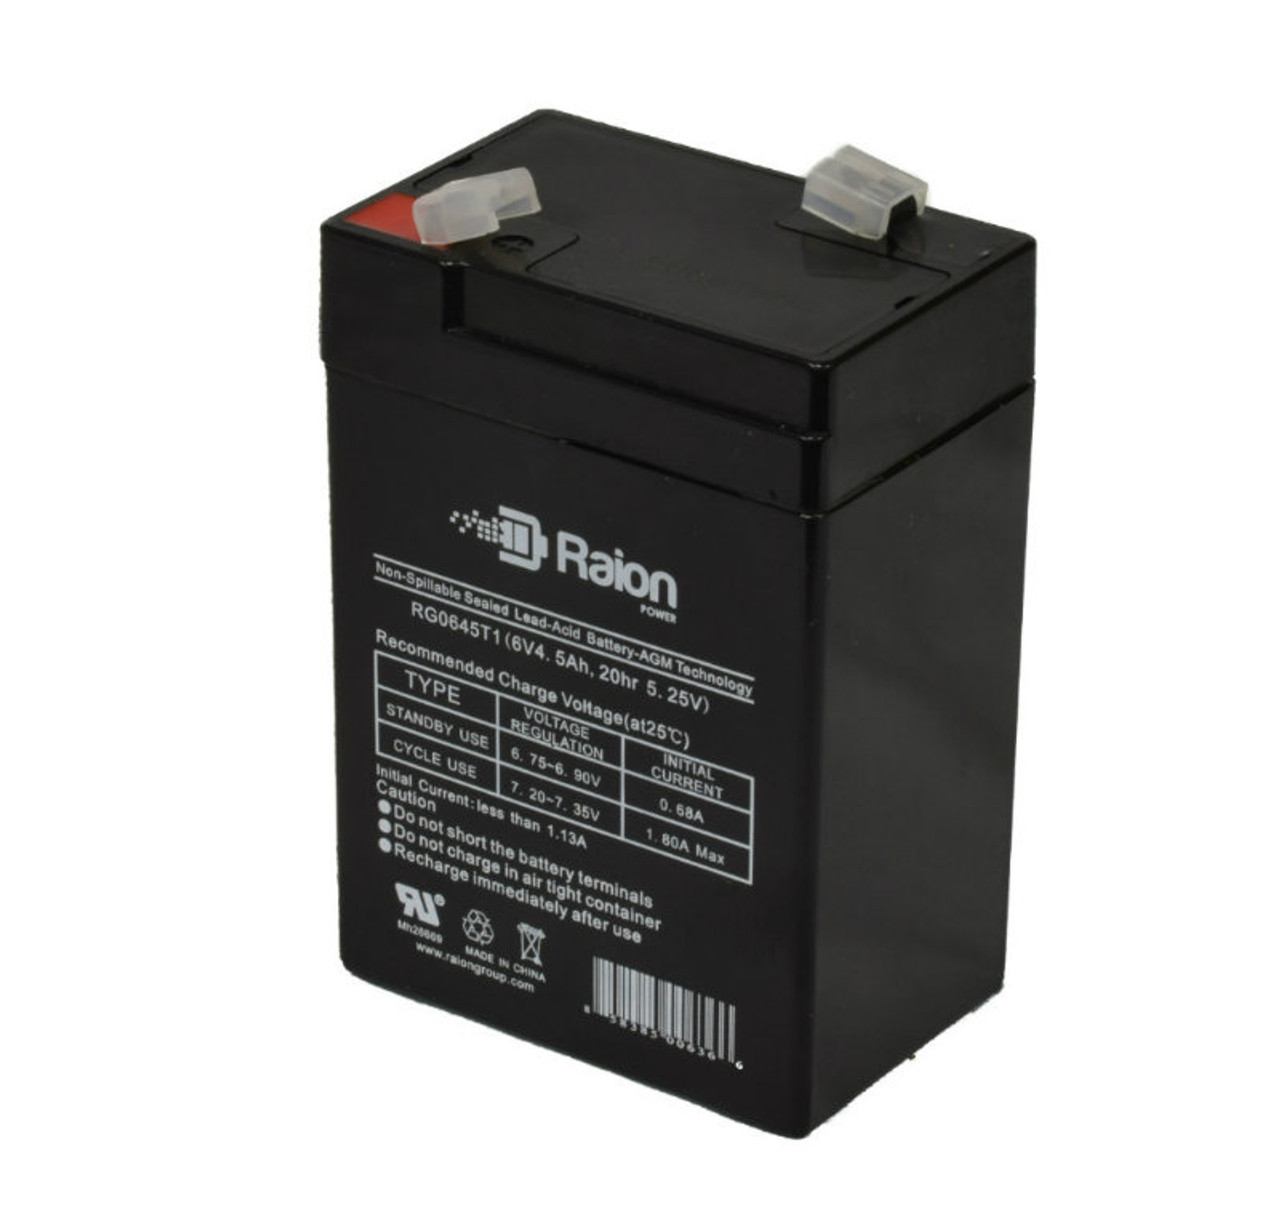 Raion Power RG0645T1 6V 4.5Ah Replacement Battery Cartridge for Peg Perego IGED1171 6V Fiat 500 S